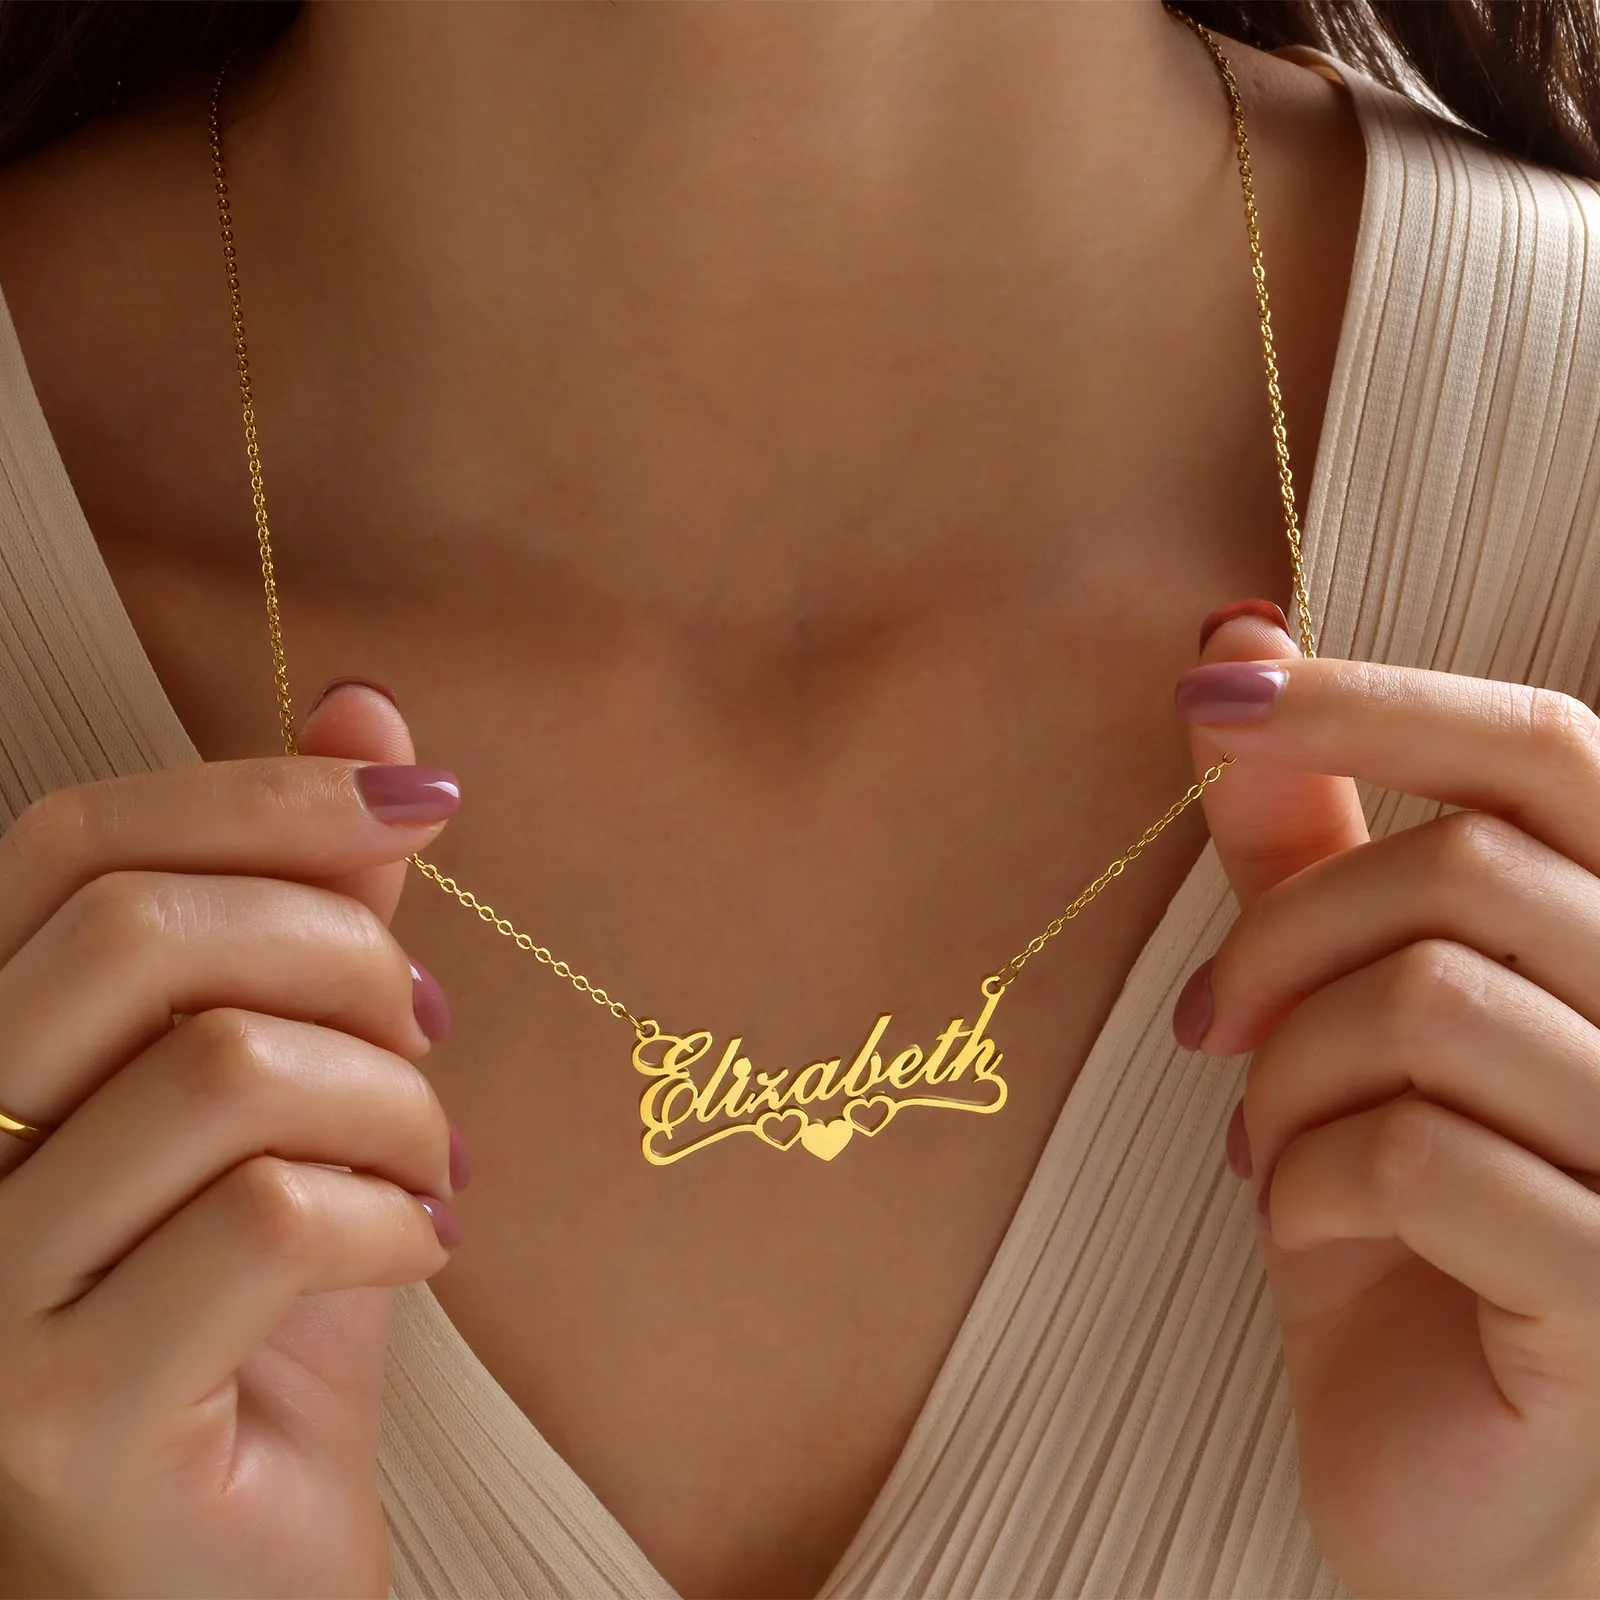 Vnox Custom Names Necklaces for Women Girls, Gold Color Stainless Steel Personalized Heart Love Pendant Collar,Gifts for Her vnox custom mom